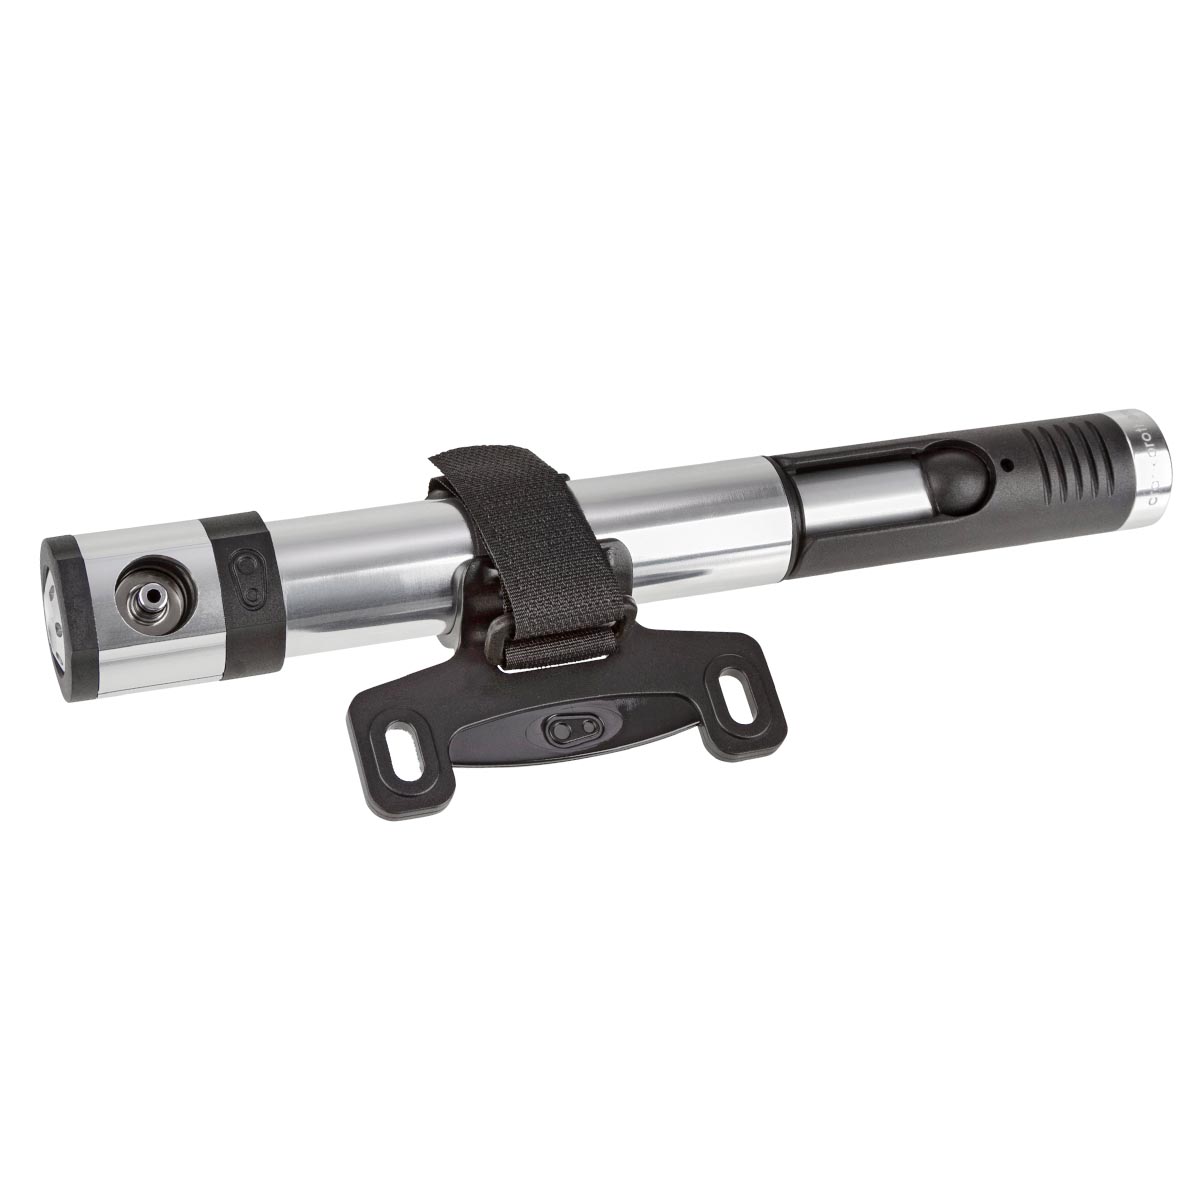 Crankbrothers Hand Pump Klic HV Silver, incl. frame mounting